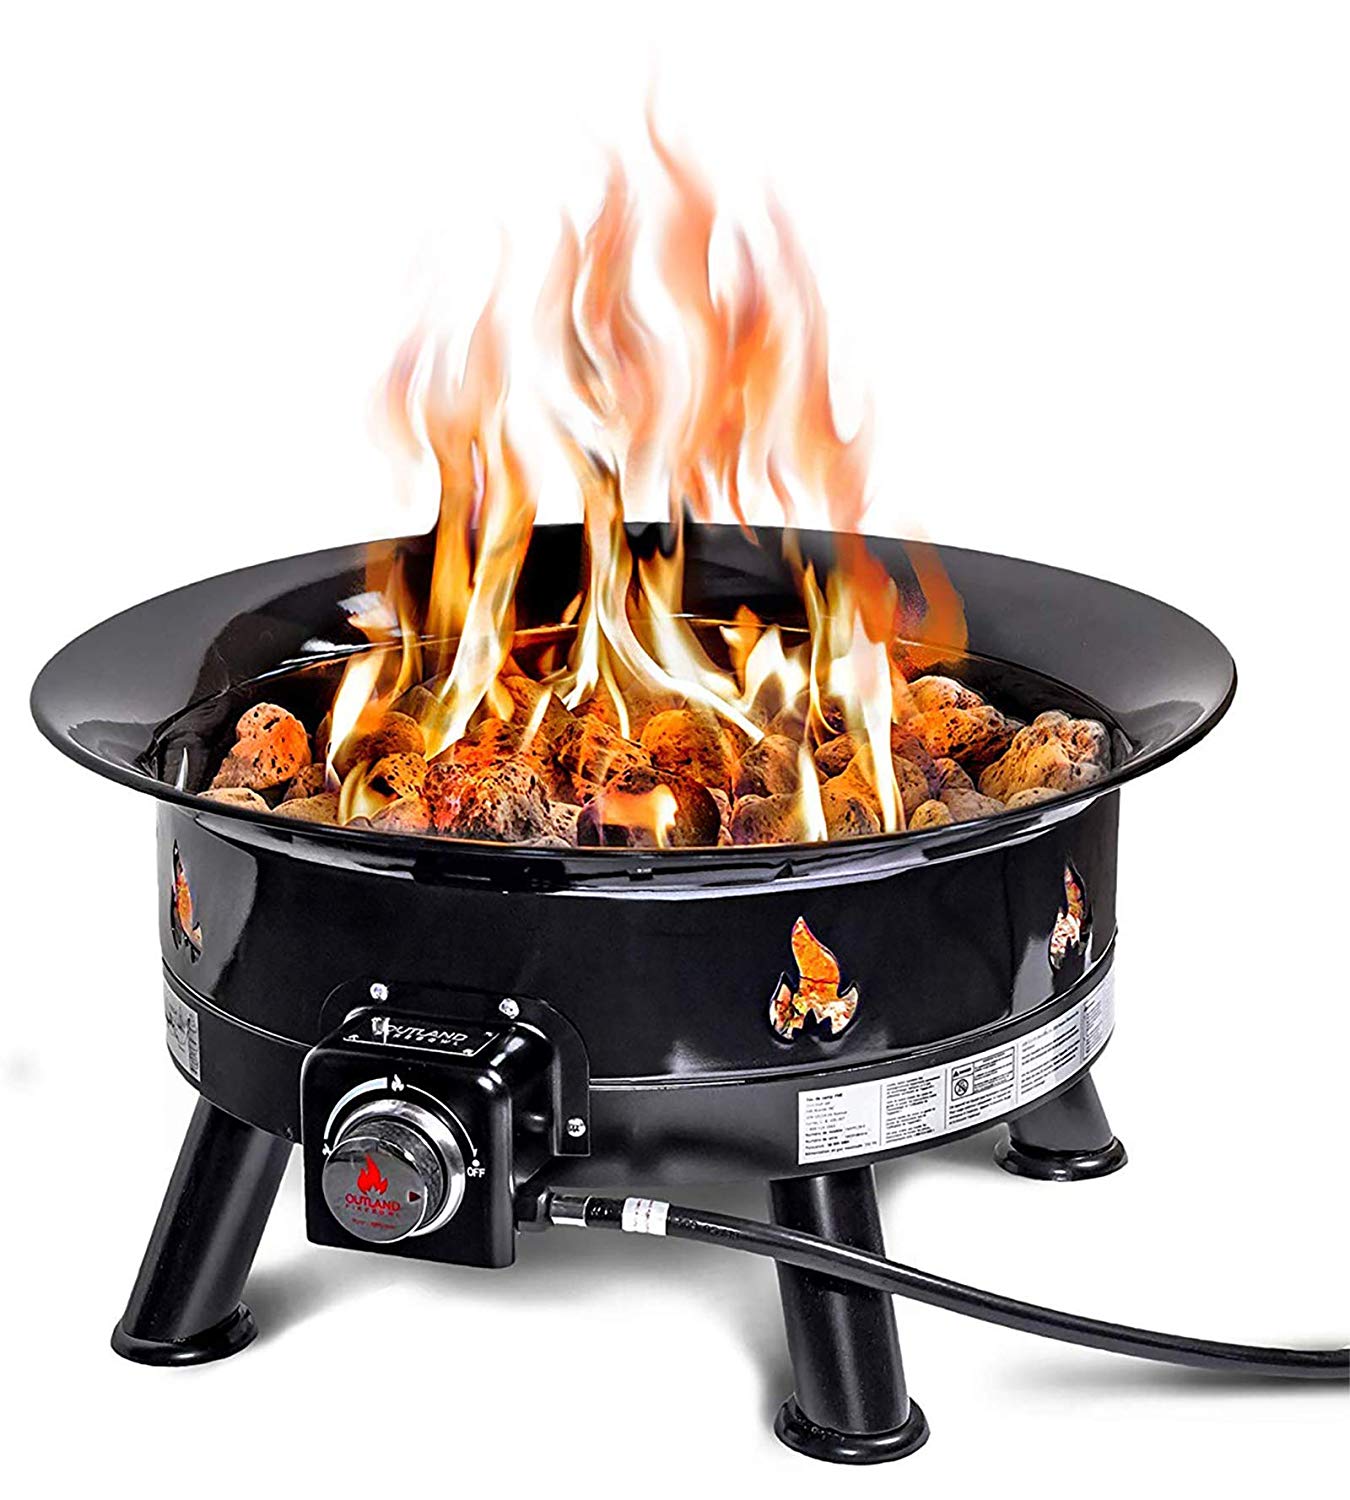 Top 10 Best Portable Propane Gas Fire Pit | Best RV Reviews